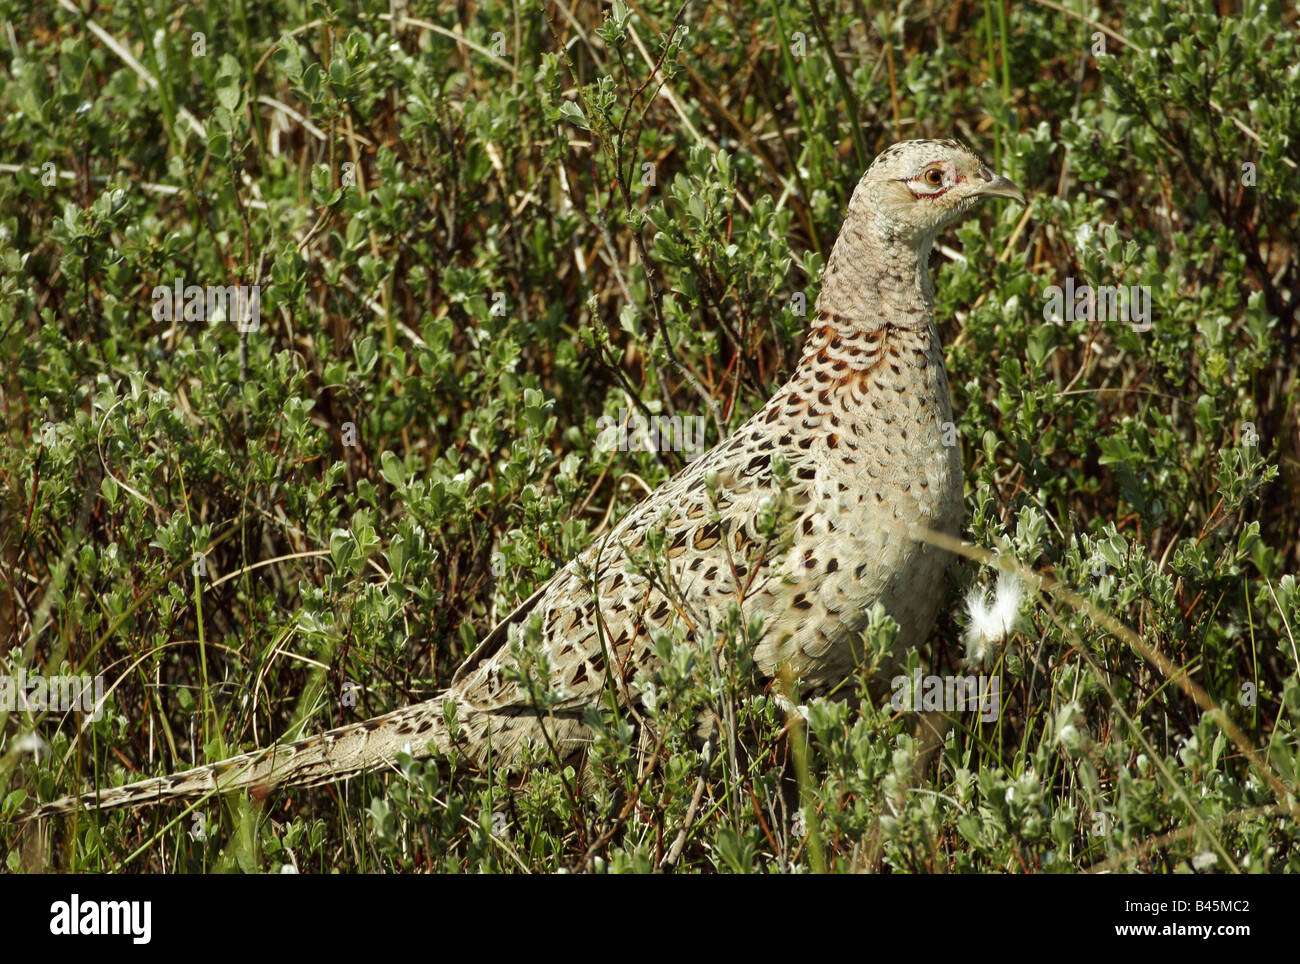 zoology / animals, avian / bird, Phasianidae, Common Pheasant (Phasianus colchicus), female animal in meadow, Amrum, Germany, distribution: Asia, Europe, Additional-Rights-Clearance-Info-Not-Available Stock Photo